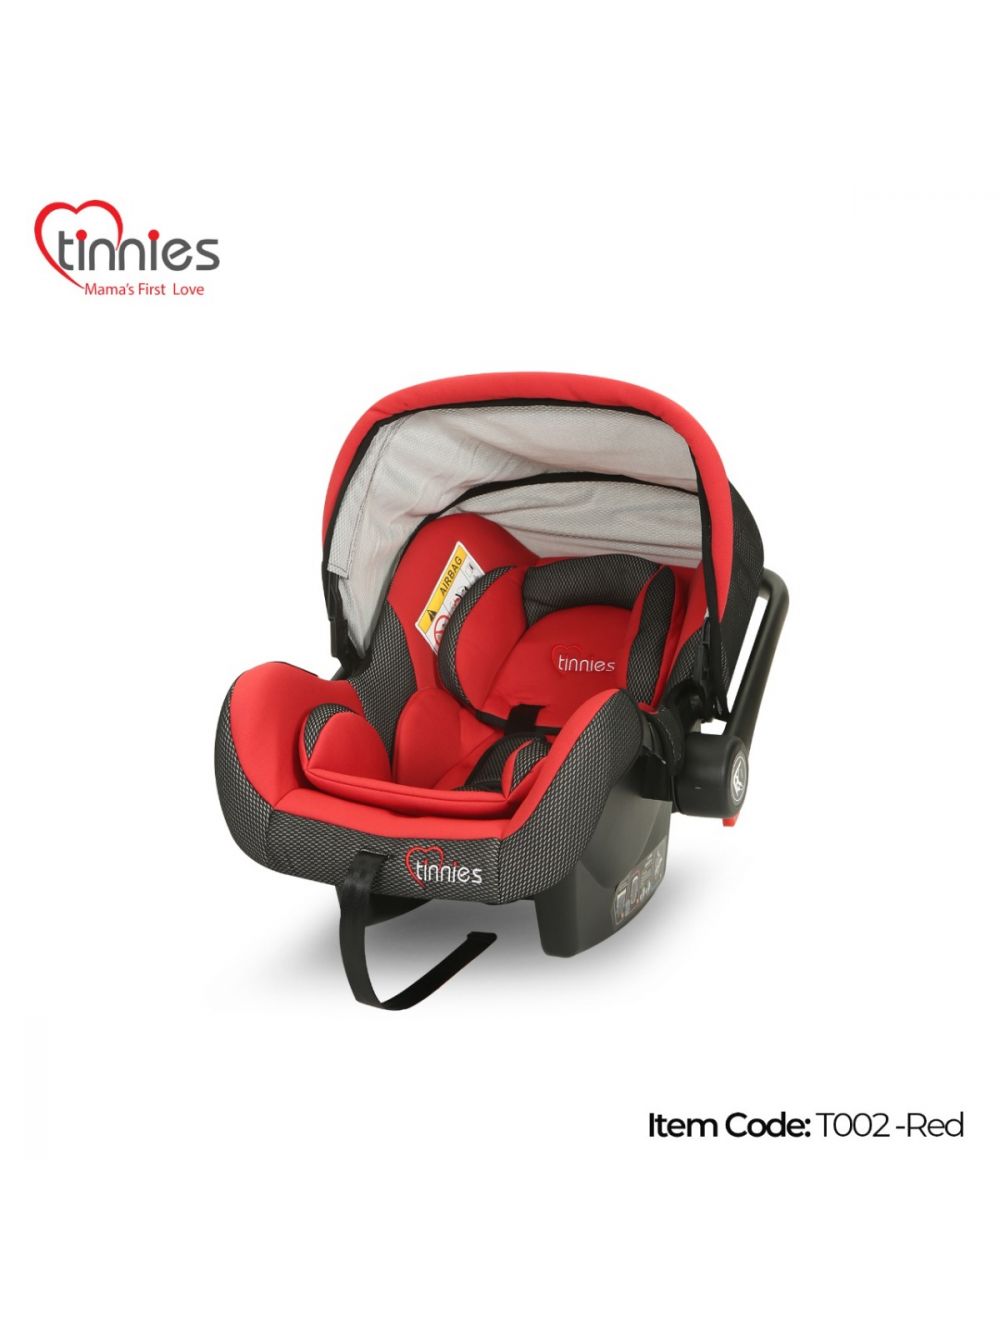 TINNIES BABY CARRY COT Red